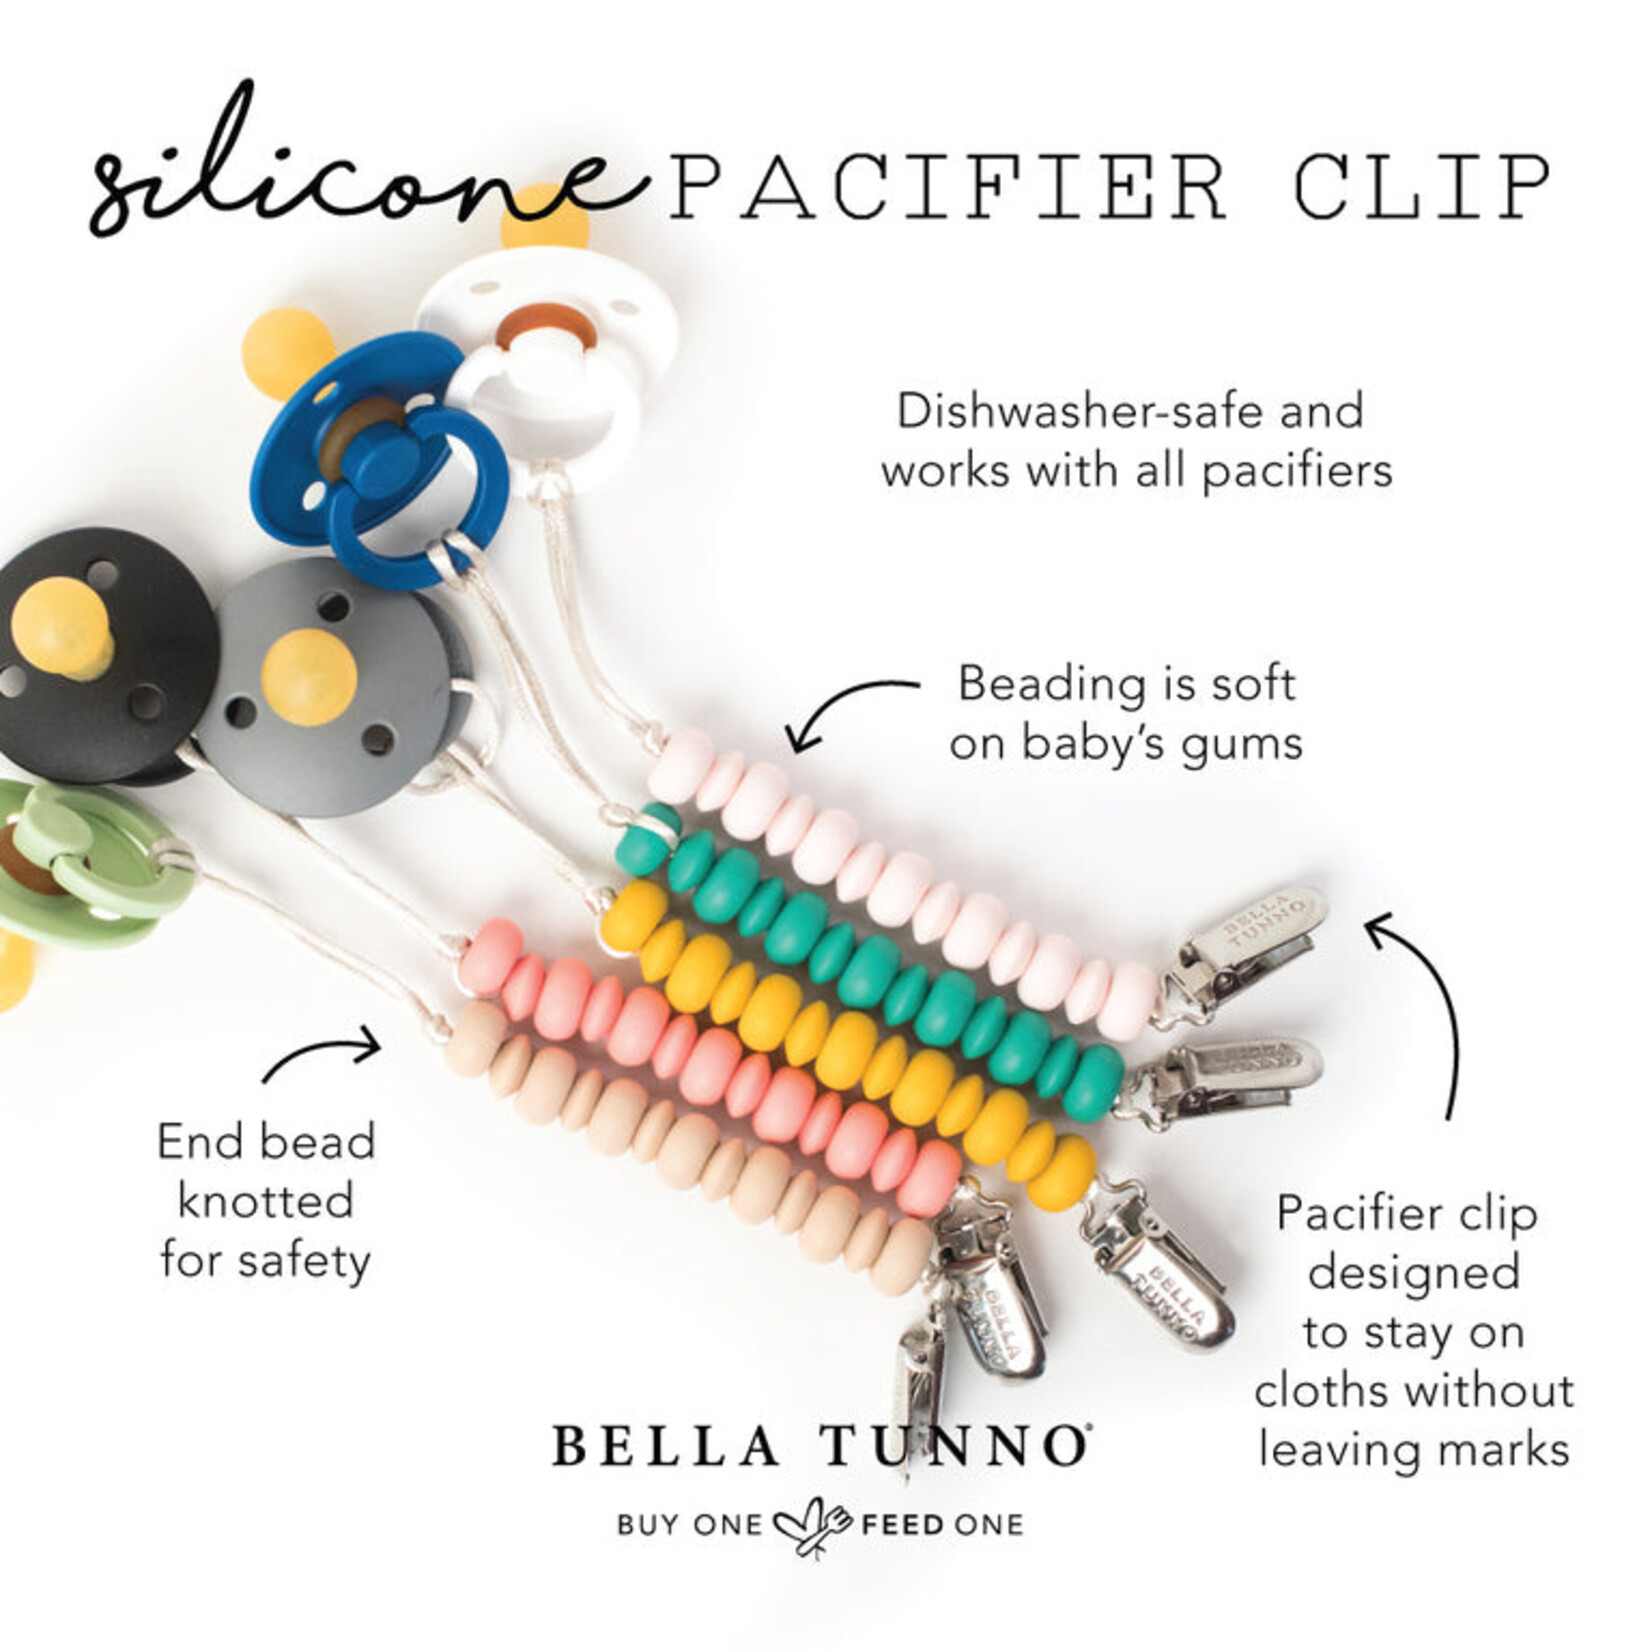 Speckled Pacifier Clip